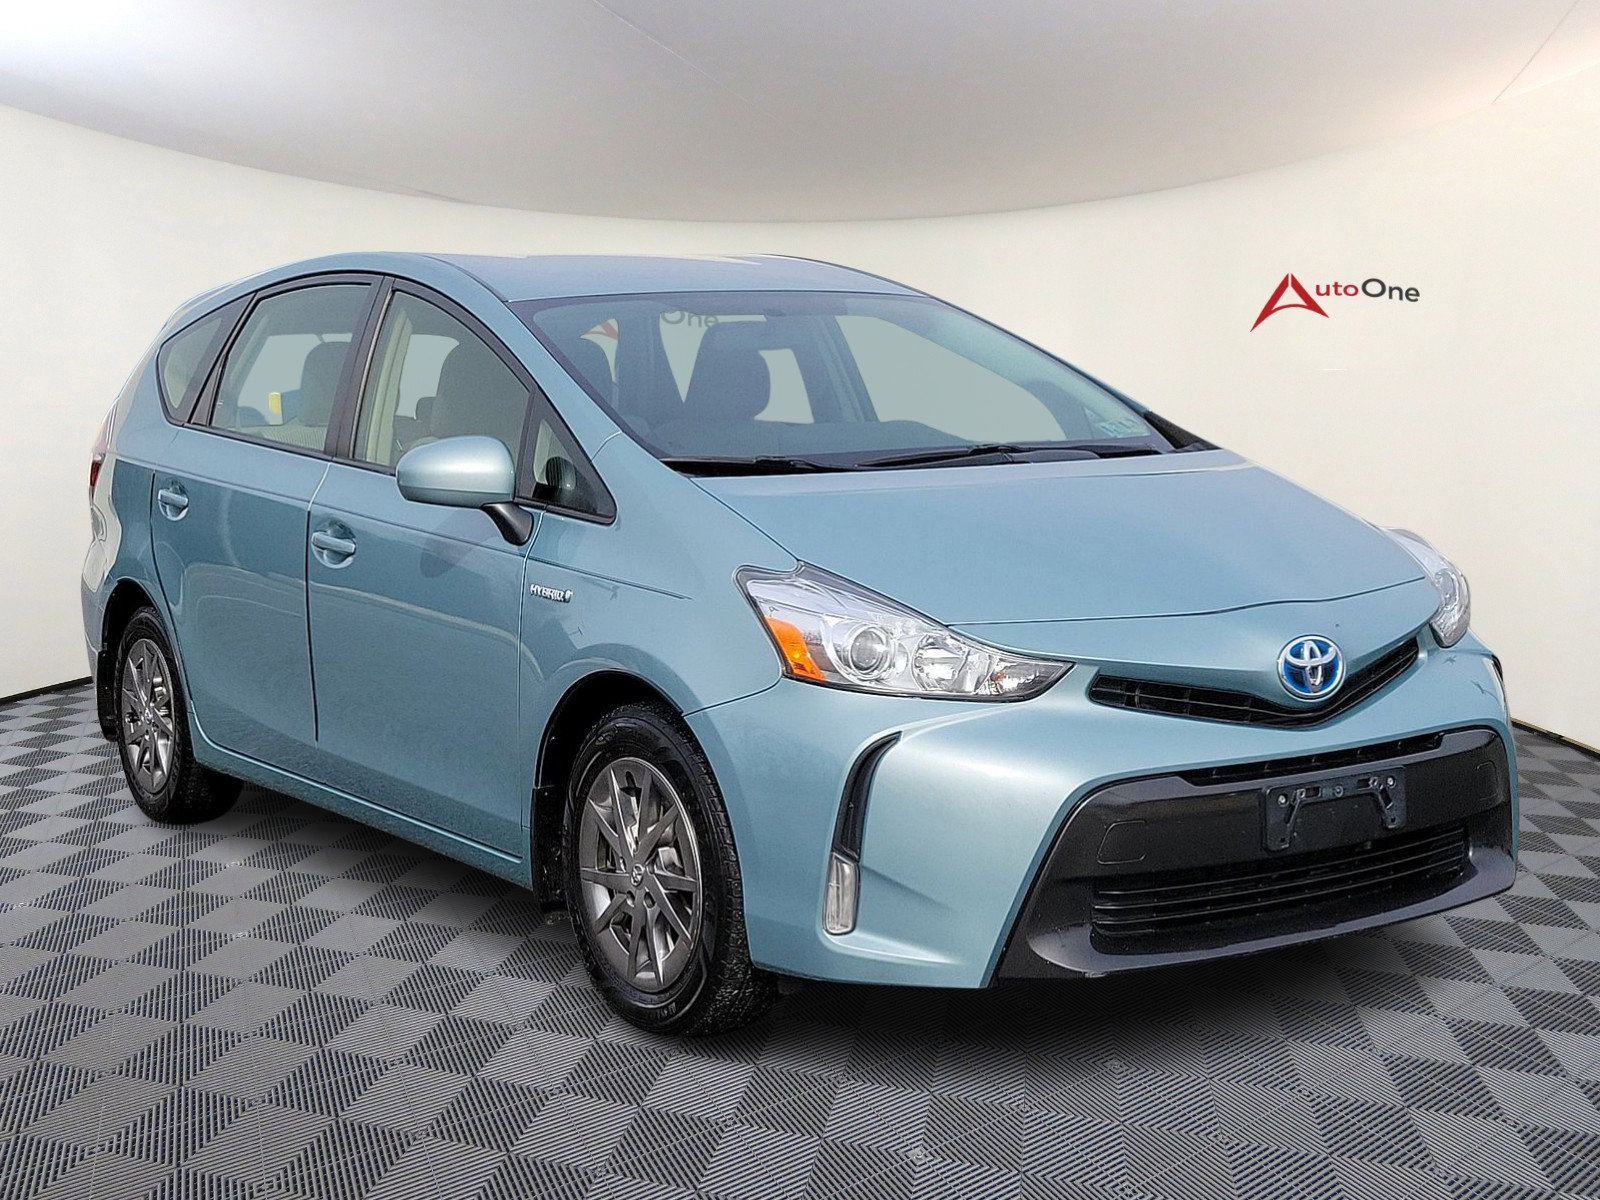 Used 2017 Toyota Prius V for Sale Right Now - Autotrader